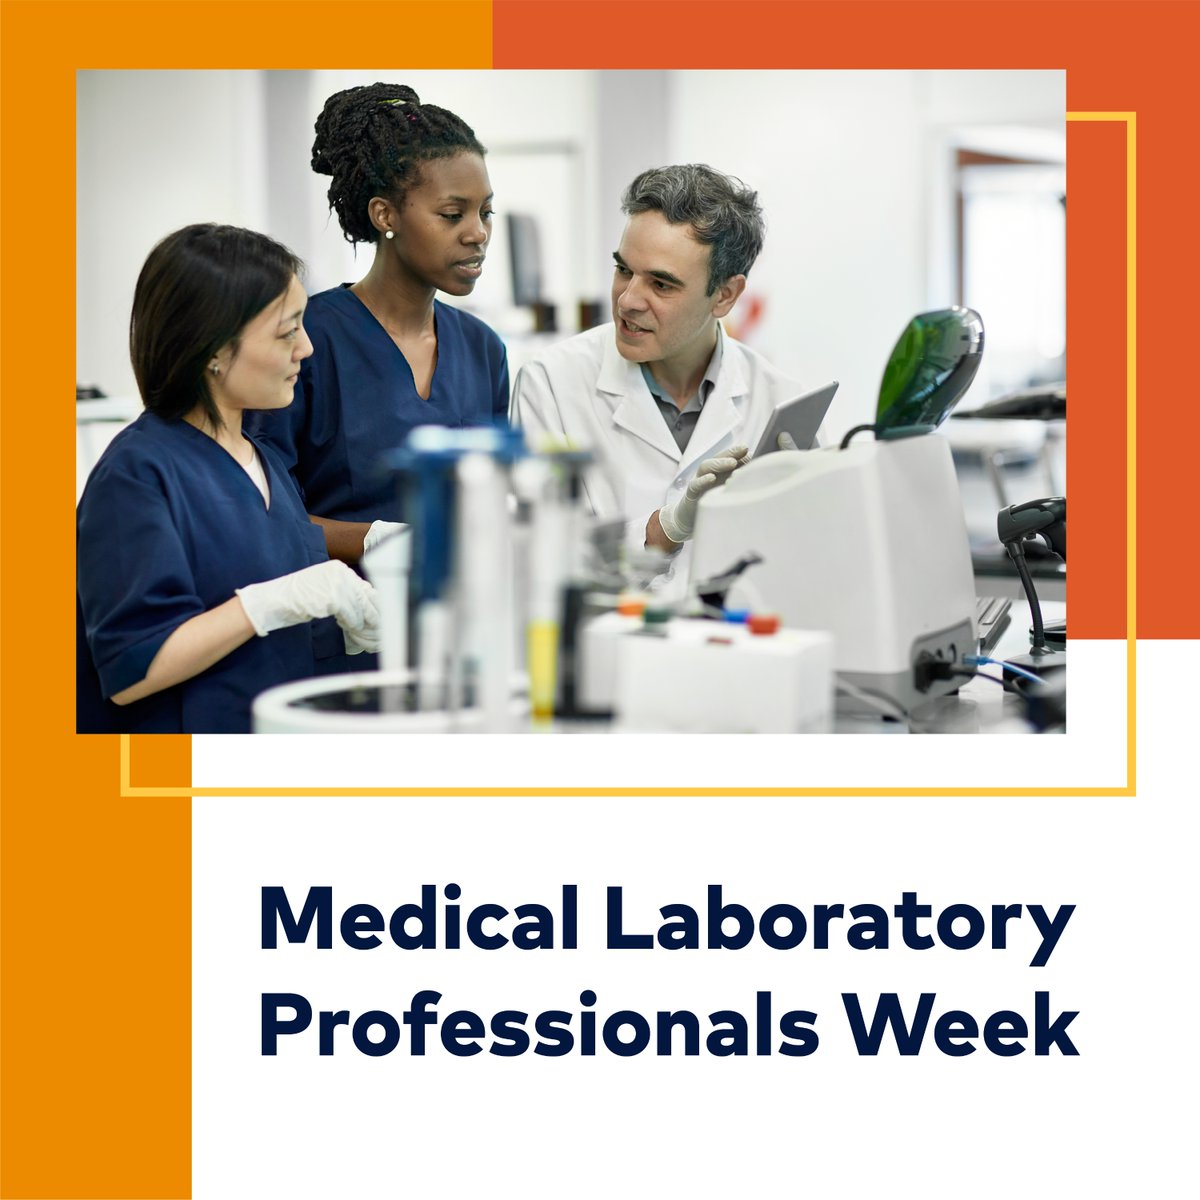 Happy Medical Laboratory Professionals Week to the laboratorians and pathologists at HCA Midwest Health and our larger @HCAHealthcare network. We celebrate the important team members who help improve the lives of our patients and communities. #CareLikeFamily #LabWeek24